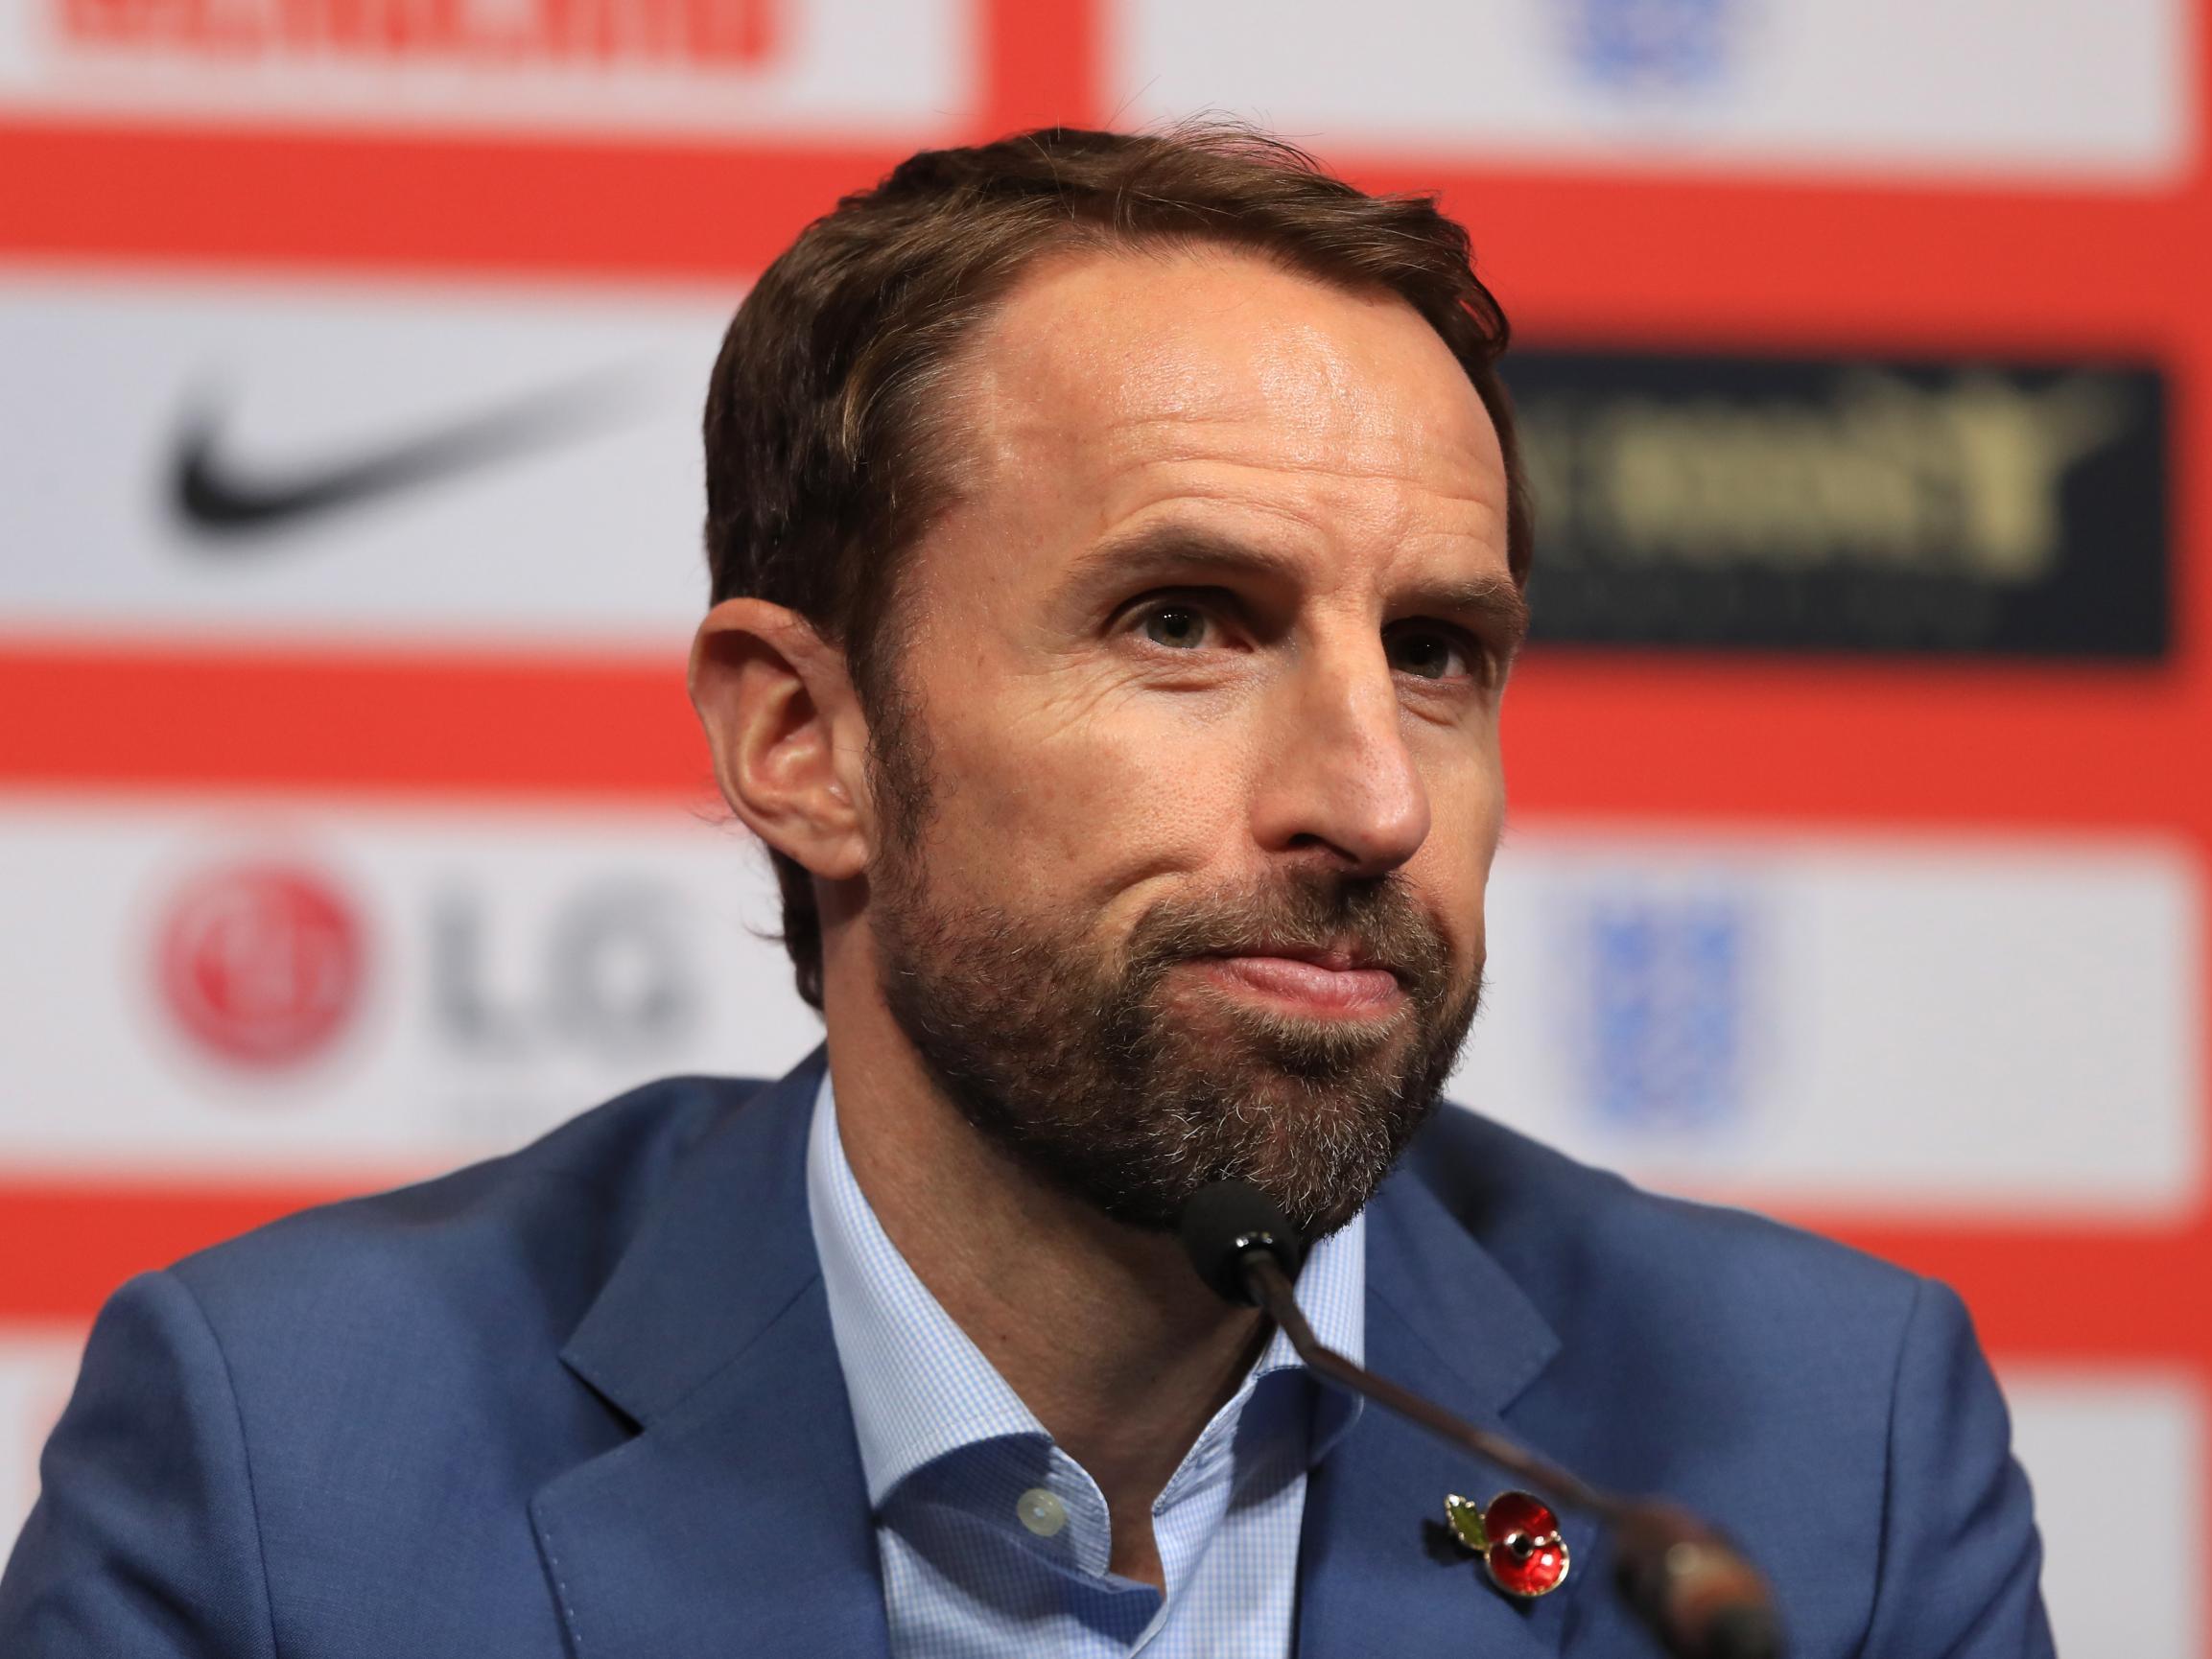 Southgate’s press conference was dominated by questions about Rooney